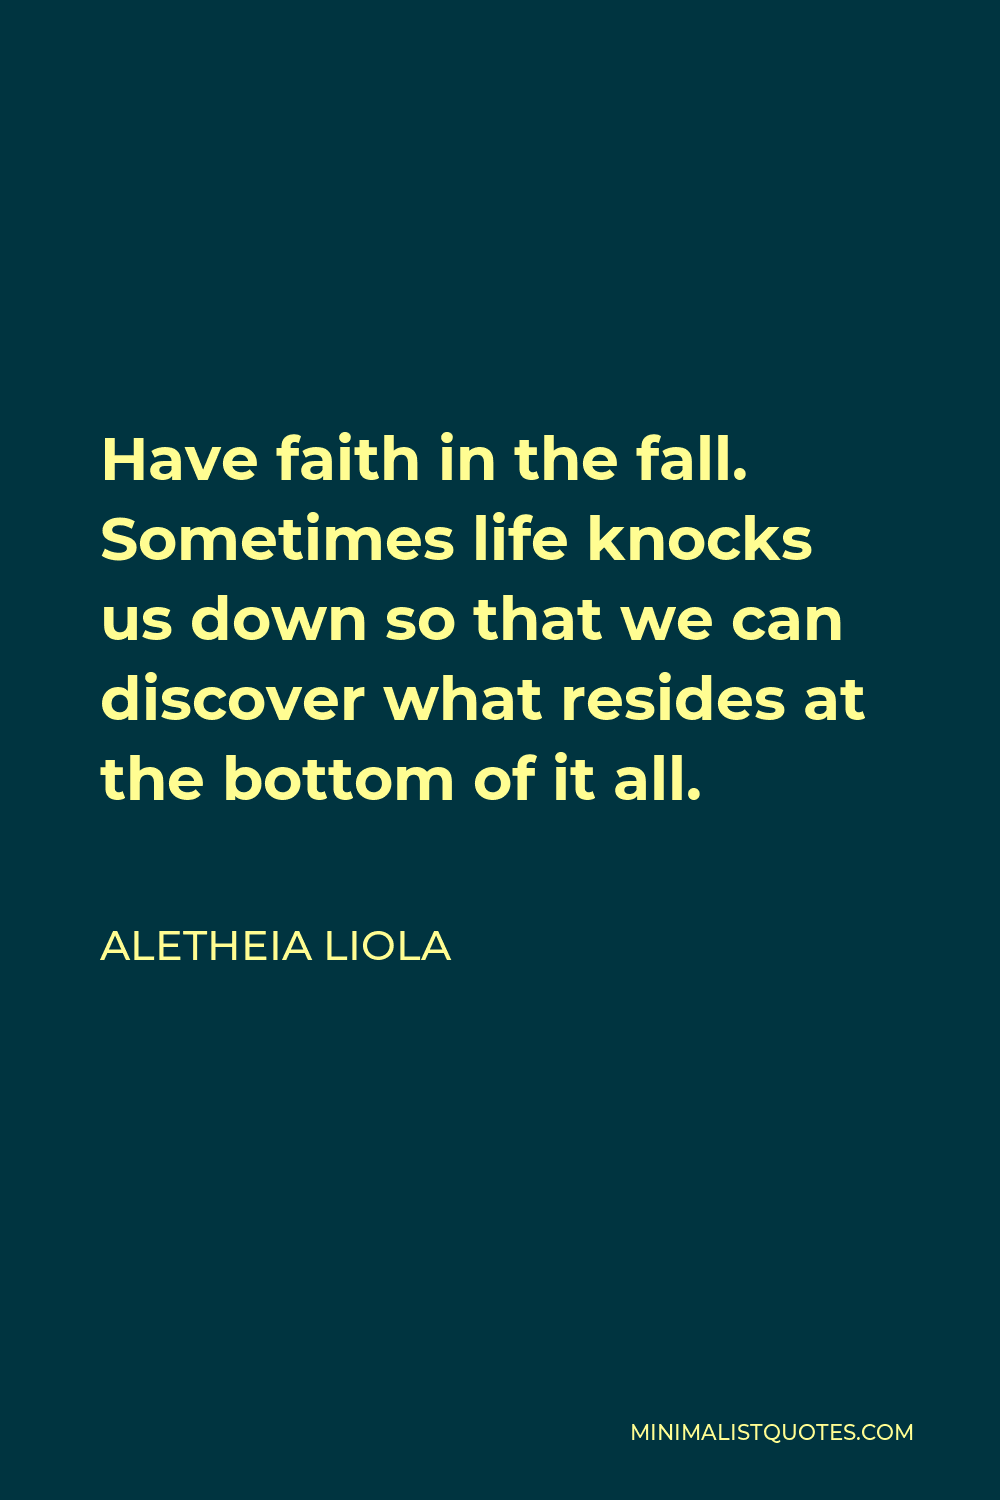 Aletheia Liola Quote - Have faith in the fall. Sometimes life knocks us down so that we can discover what resides at the bottom of it all.